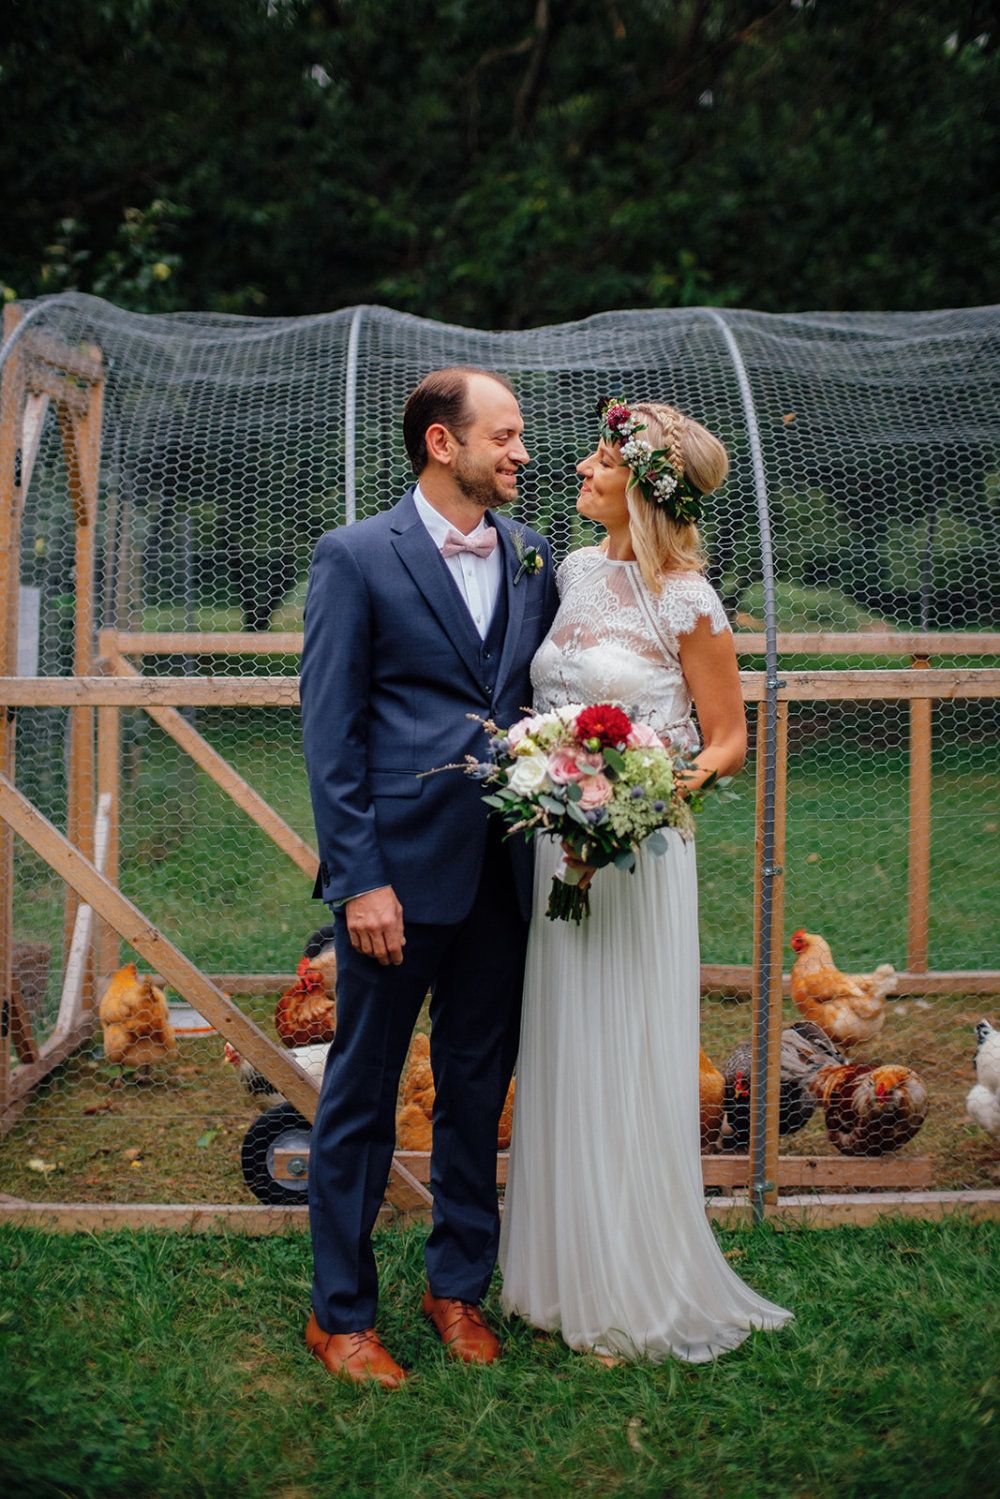 On their wedding day, a couple smiles at each other in front of the chicken run.